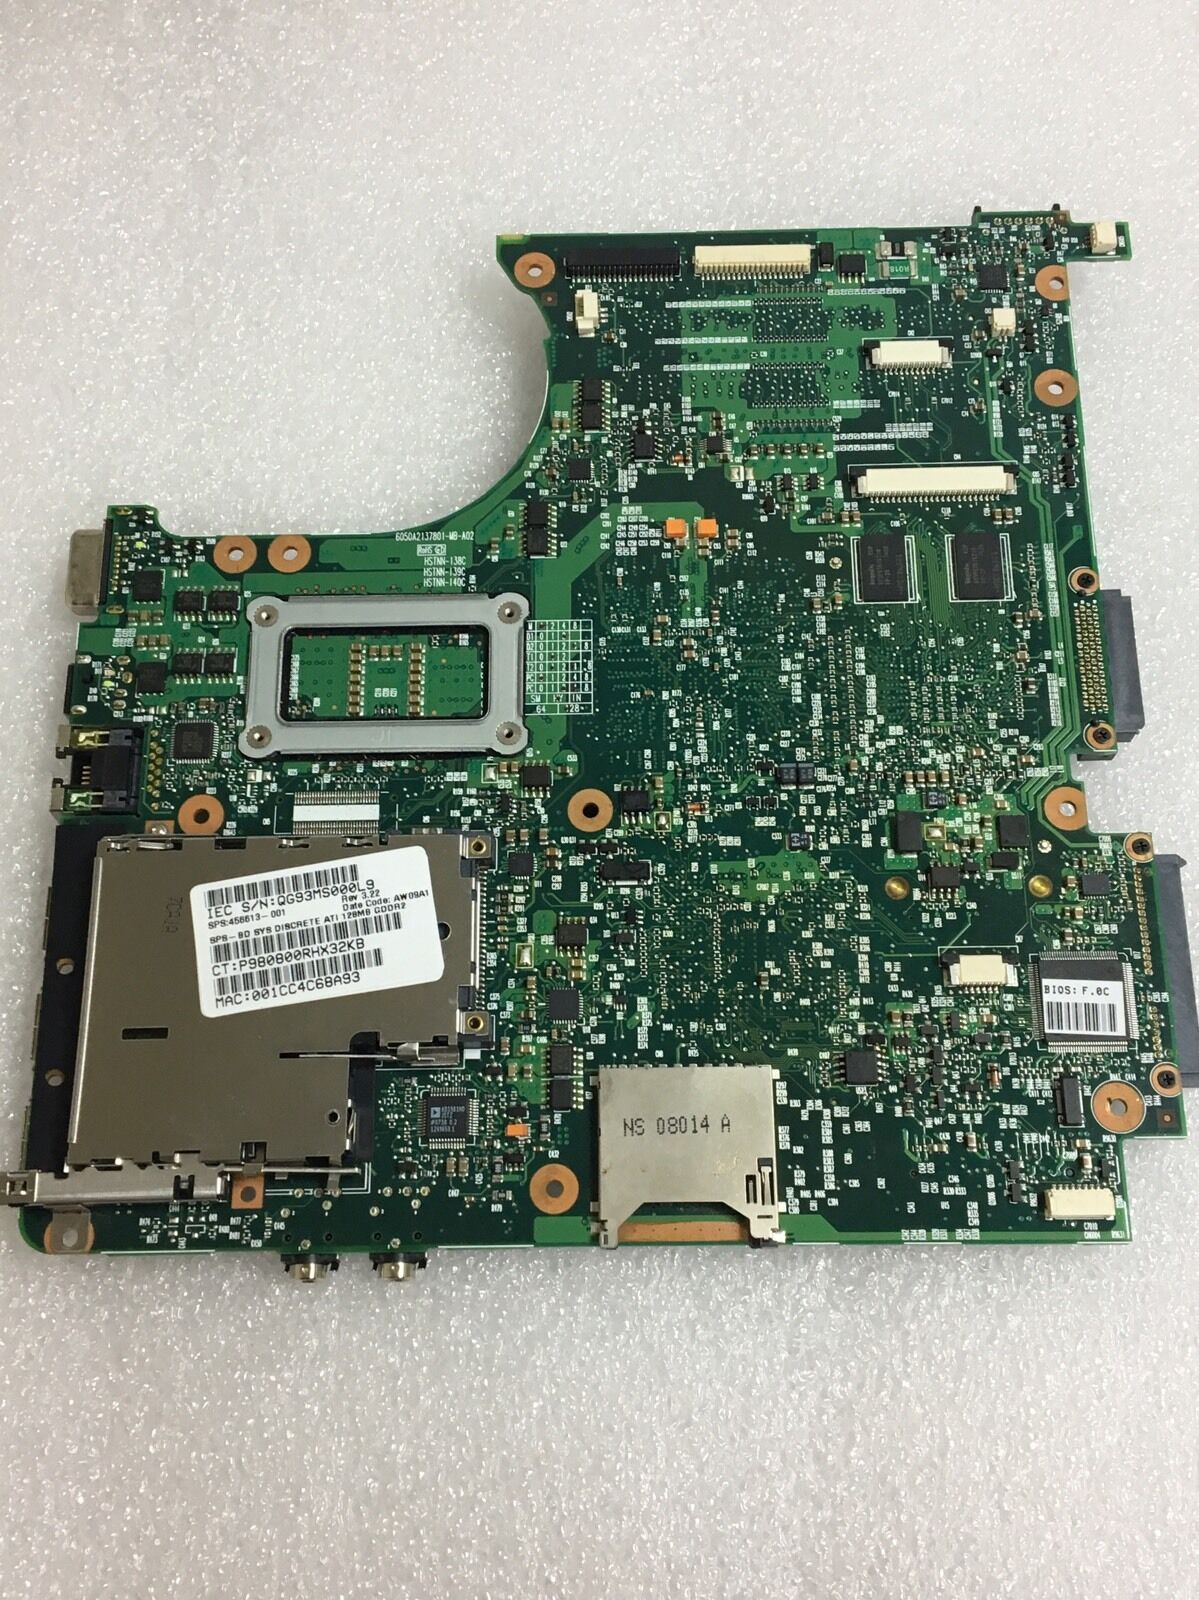 NEW x 1 HP COMPAQ 6520s 6820s INTEL LAPTOP MOTHERBOARD 456613-001 DESCRIPTION YOU ARE BUYING A NEW x 1 HP